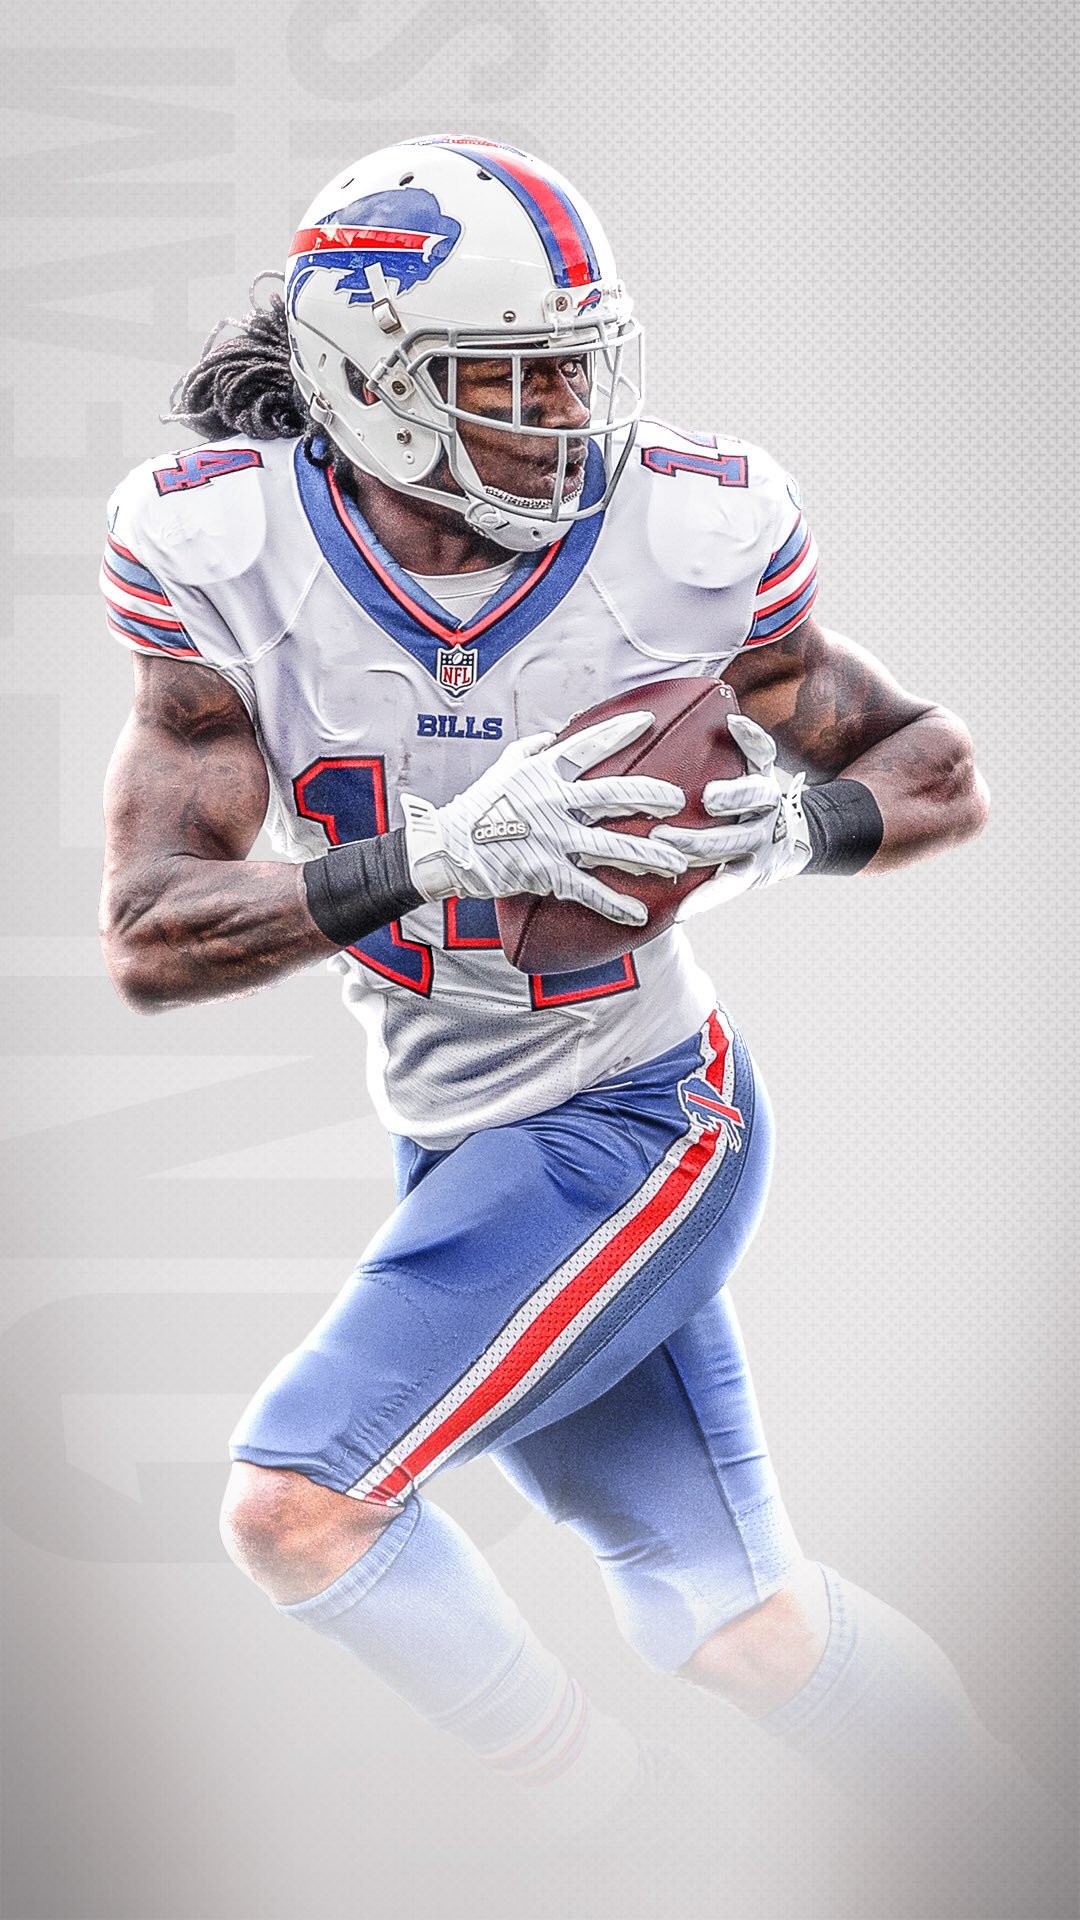 1080x1920 Buffalo Bills on Twitter: "Turning up the heat with #WallpaperWednesday. ð¥  https://t.co/ku4iQefyvj"